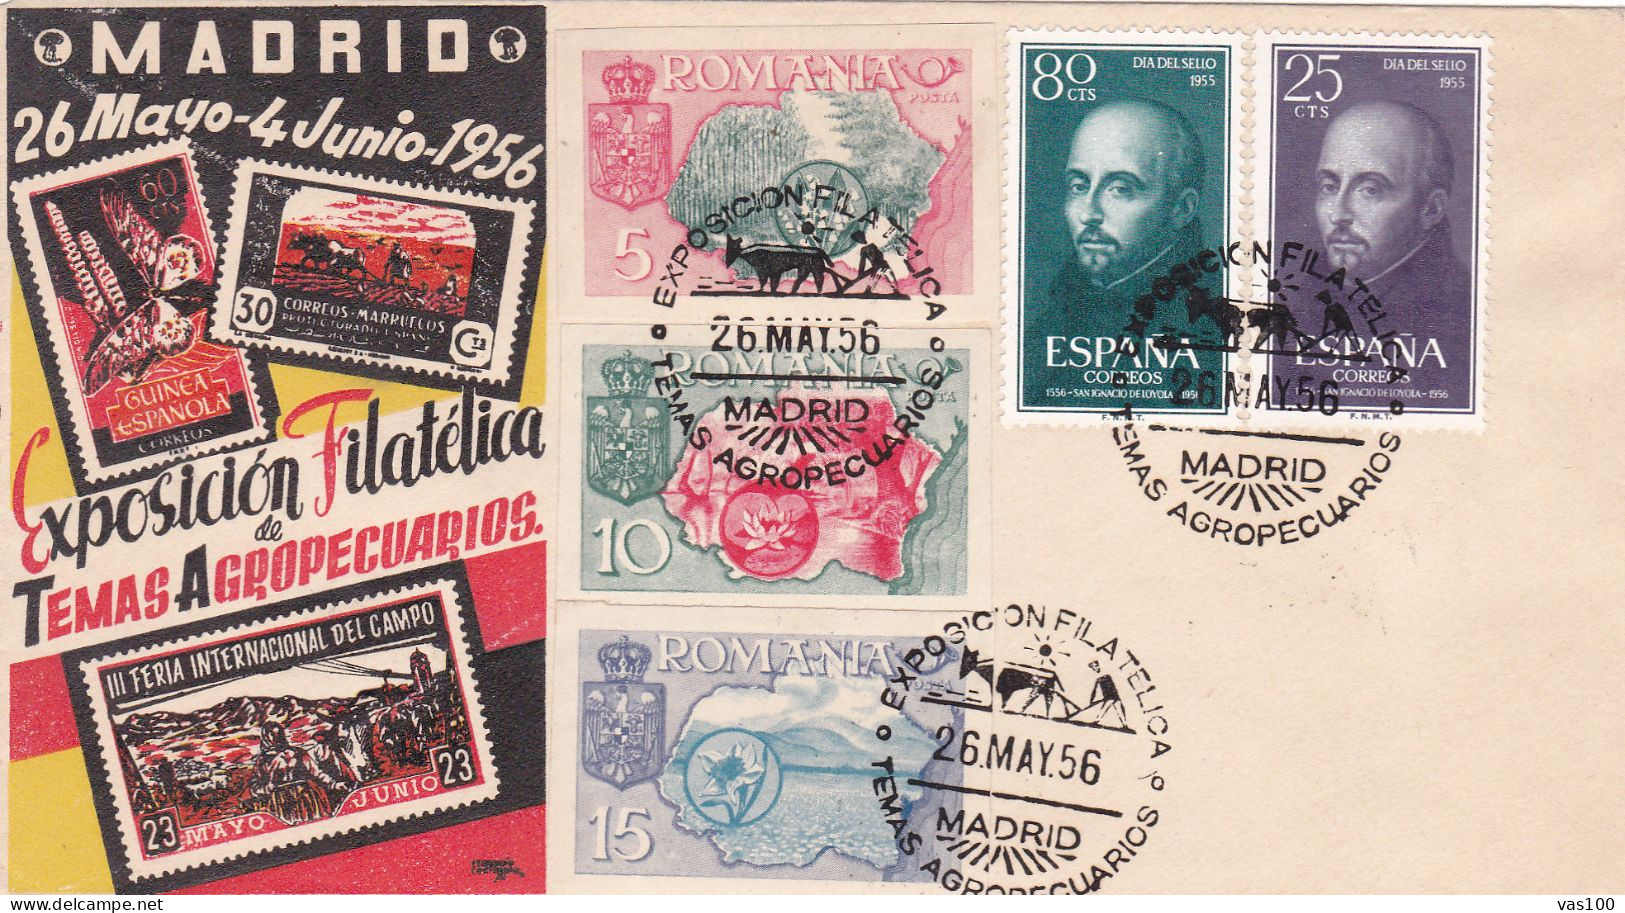 SPAIN EXILE  COVERS  FDC   PHILATELIC EXHIBITION 1956 PERFORATED   ,ROMANIA - FDC